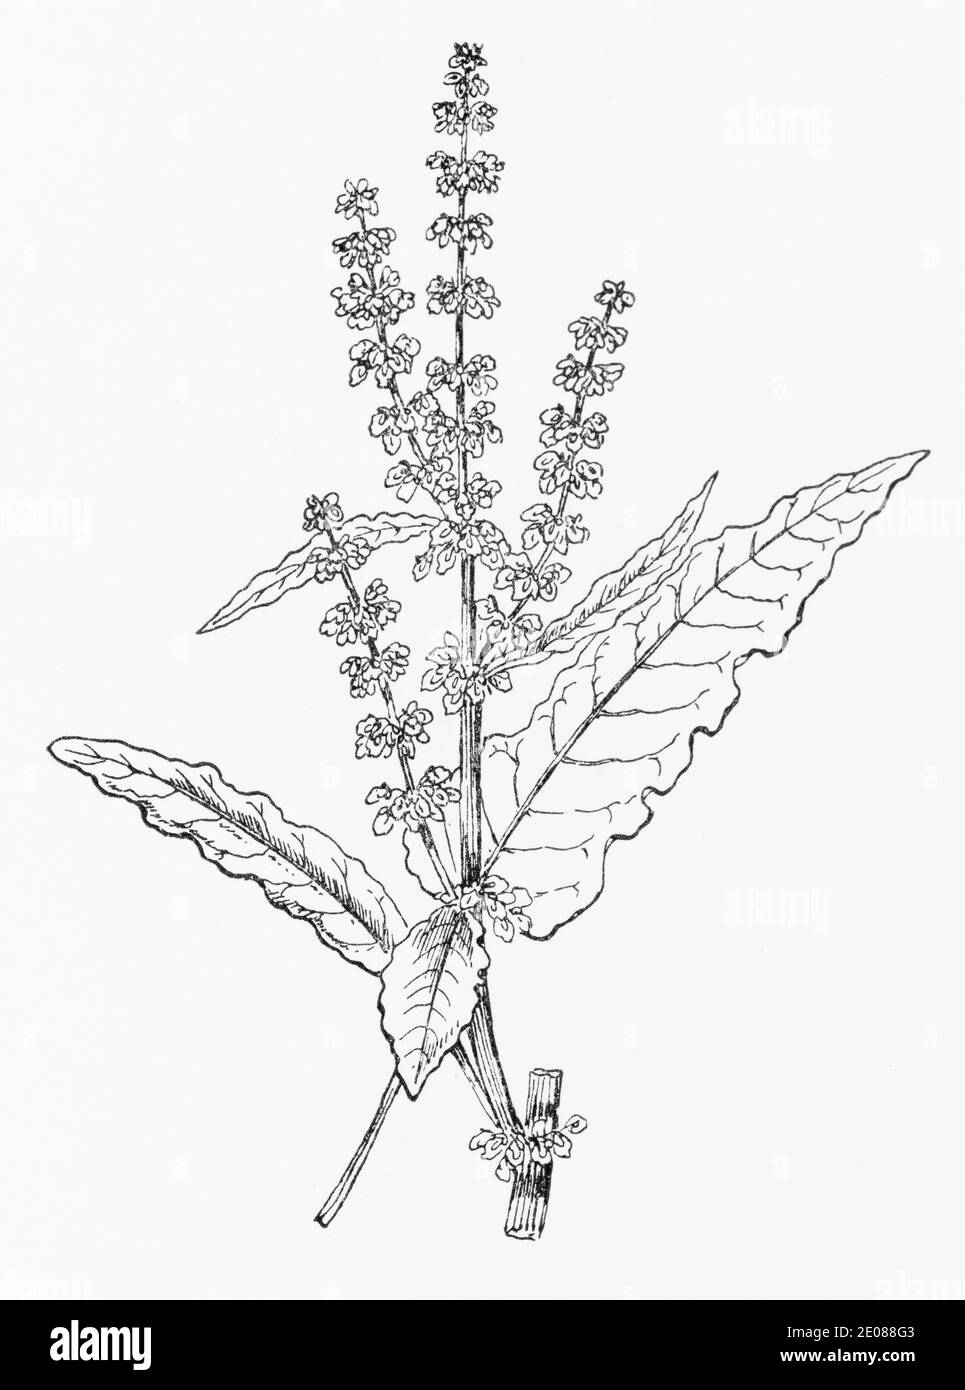 Old botanical illustration engraving of Curled Dock / Rumex crispus. Traditional medicinal herbal plant.  See Notes Stock Photo